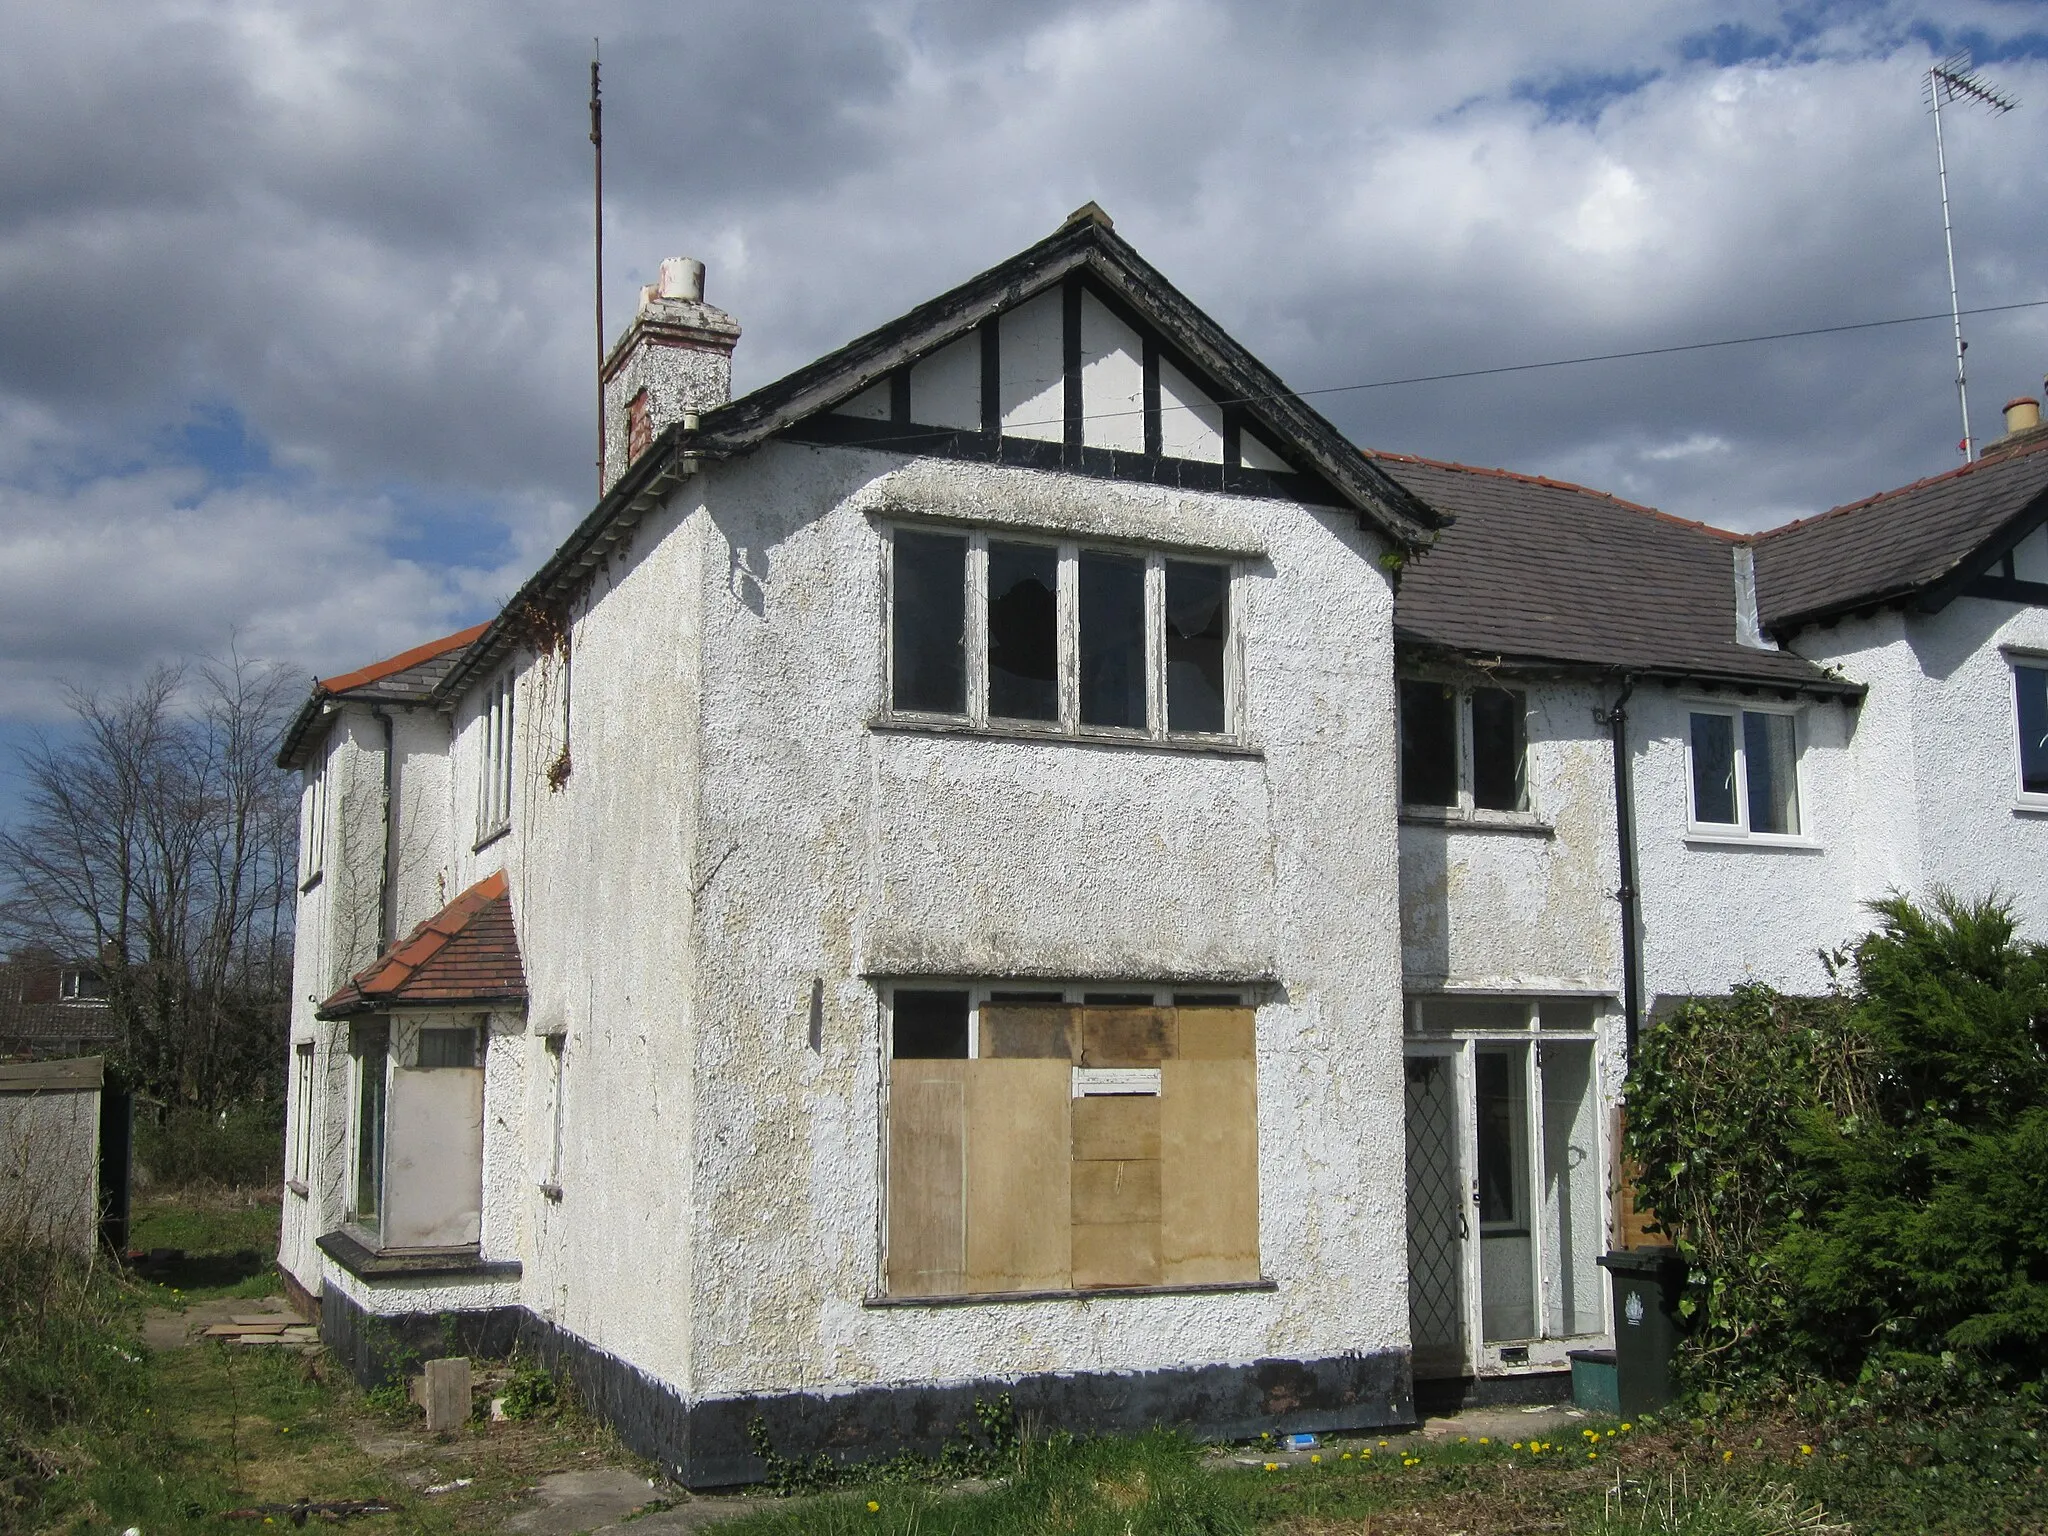 Photo showing: Boarded-up house on West Vale, Little Neston, Cheshire, England.